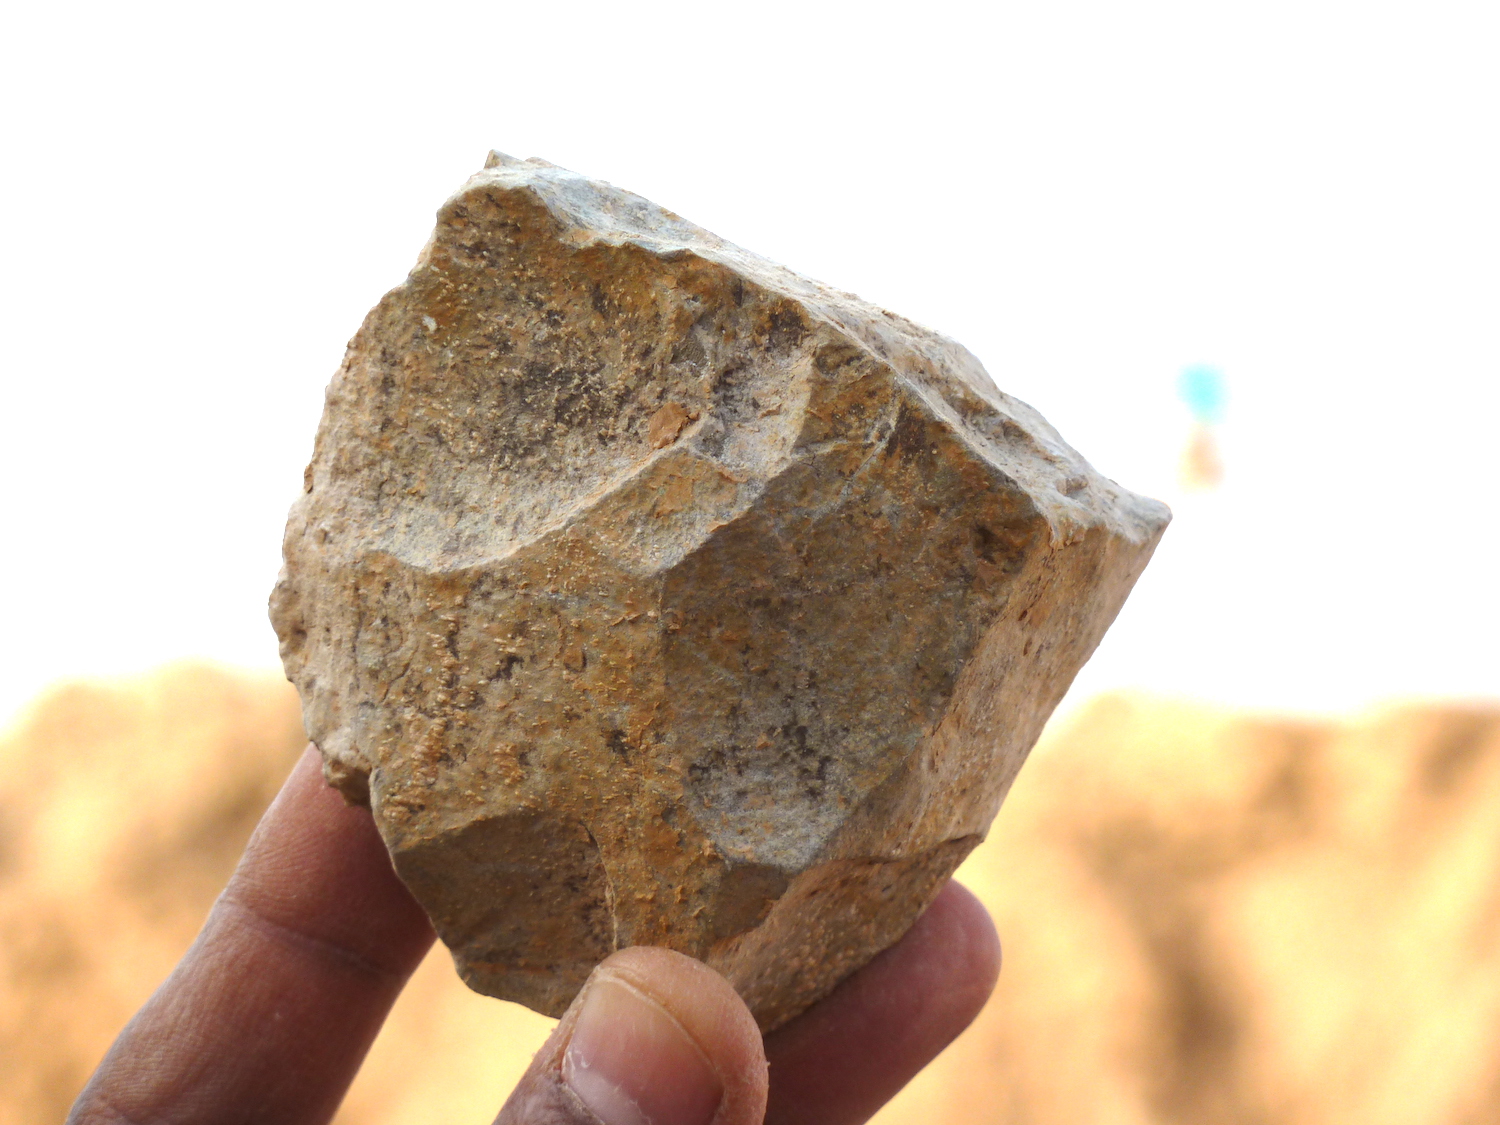 An Oldowan core freshly excavated at Ain Boucherit from which sharp-edged cutting flakes were removed.